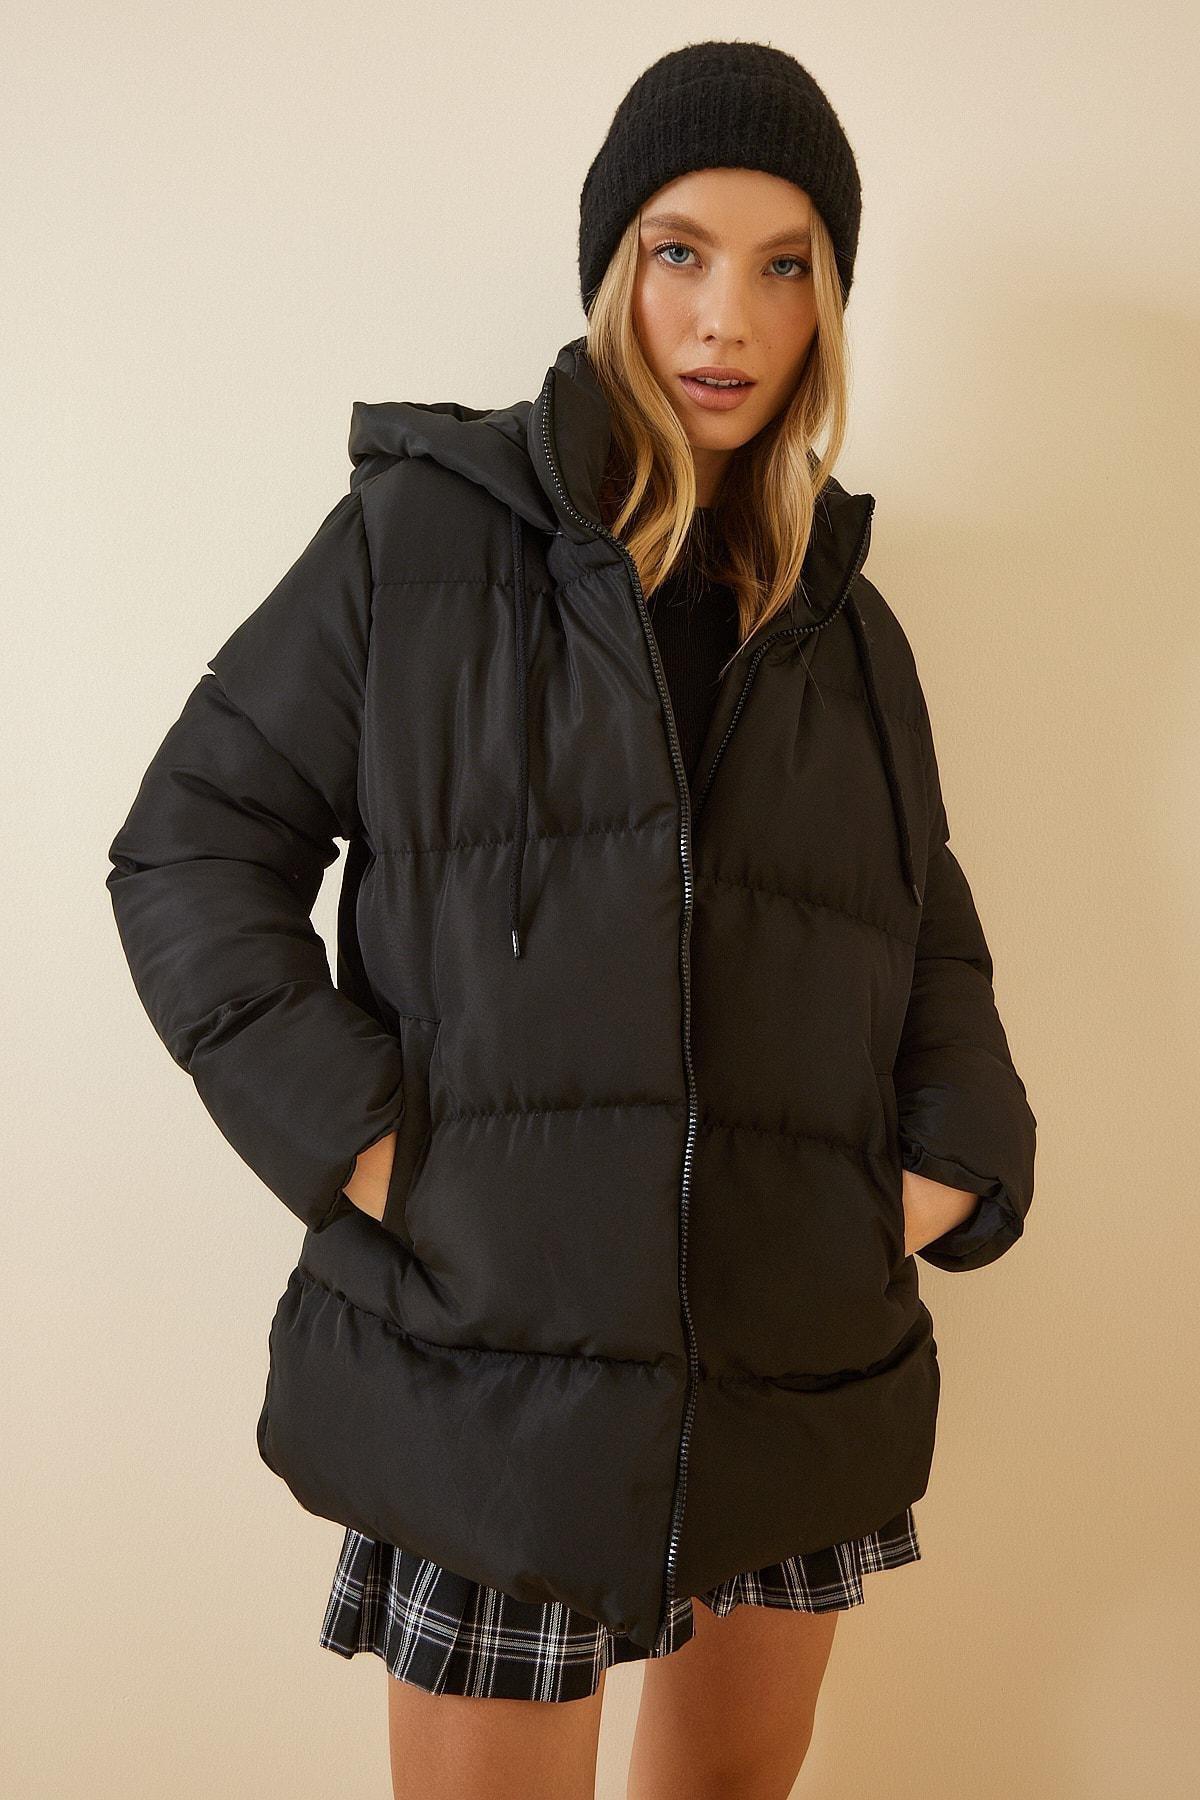 Happiness Istanbul - Black Puffer Polyester Jacket